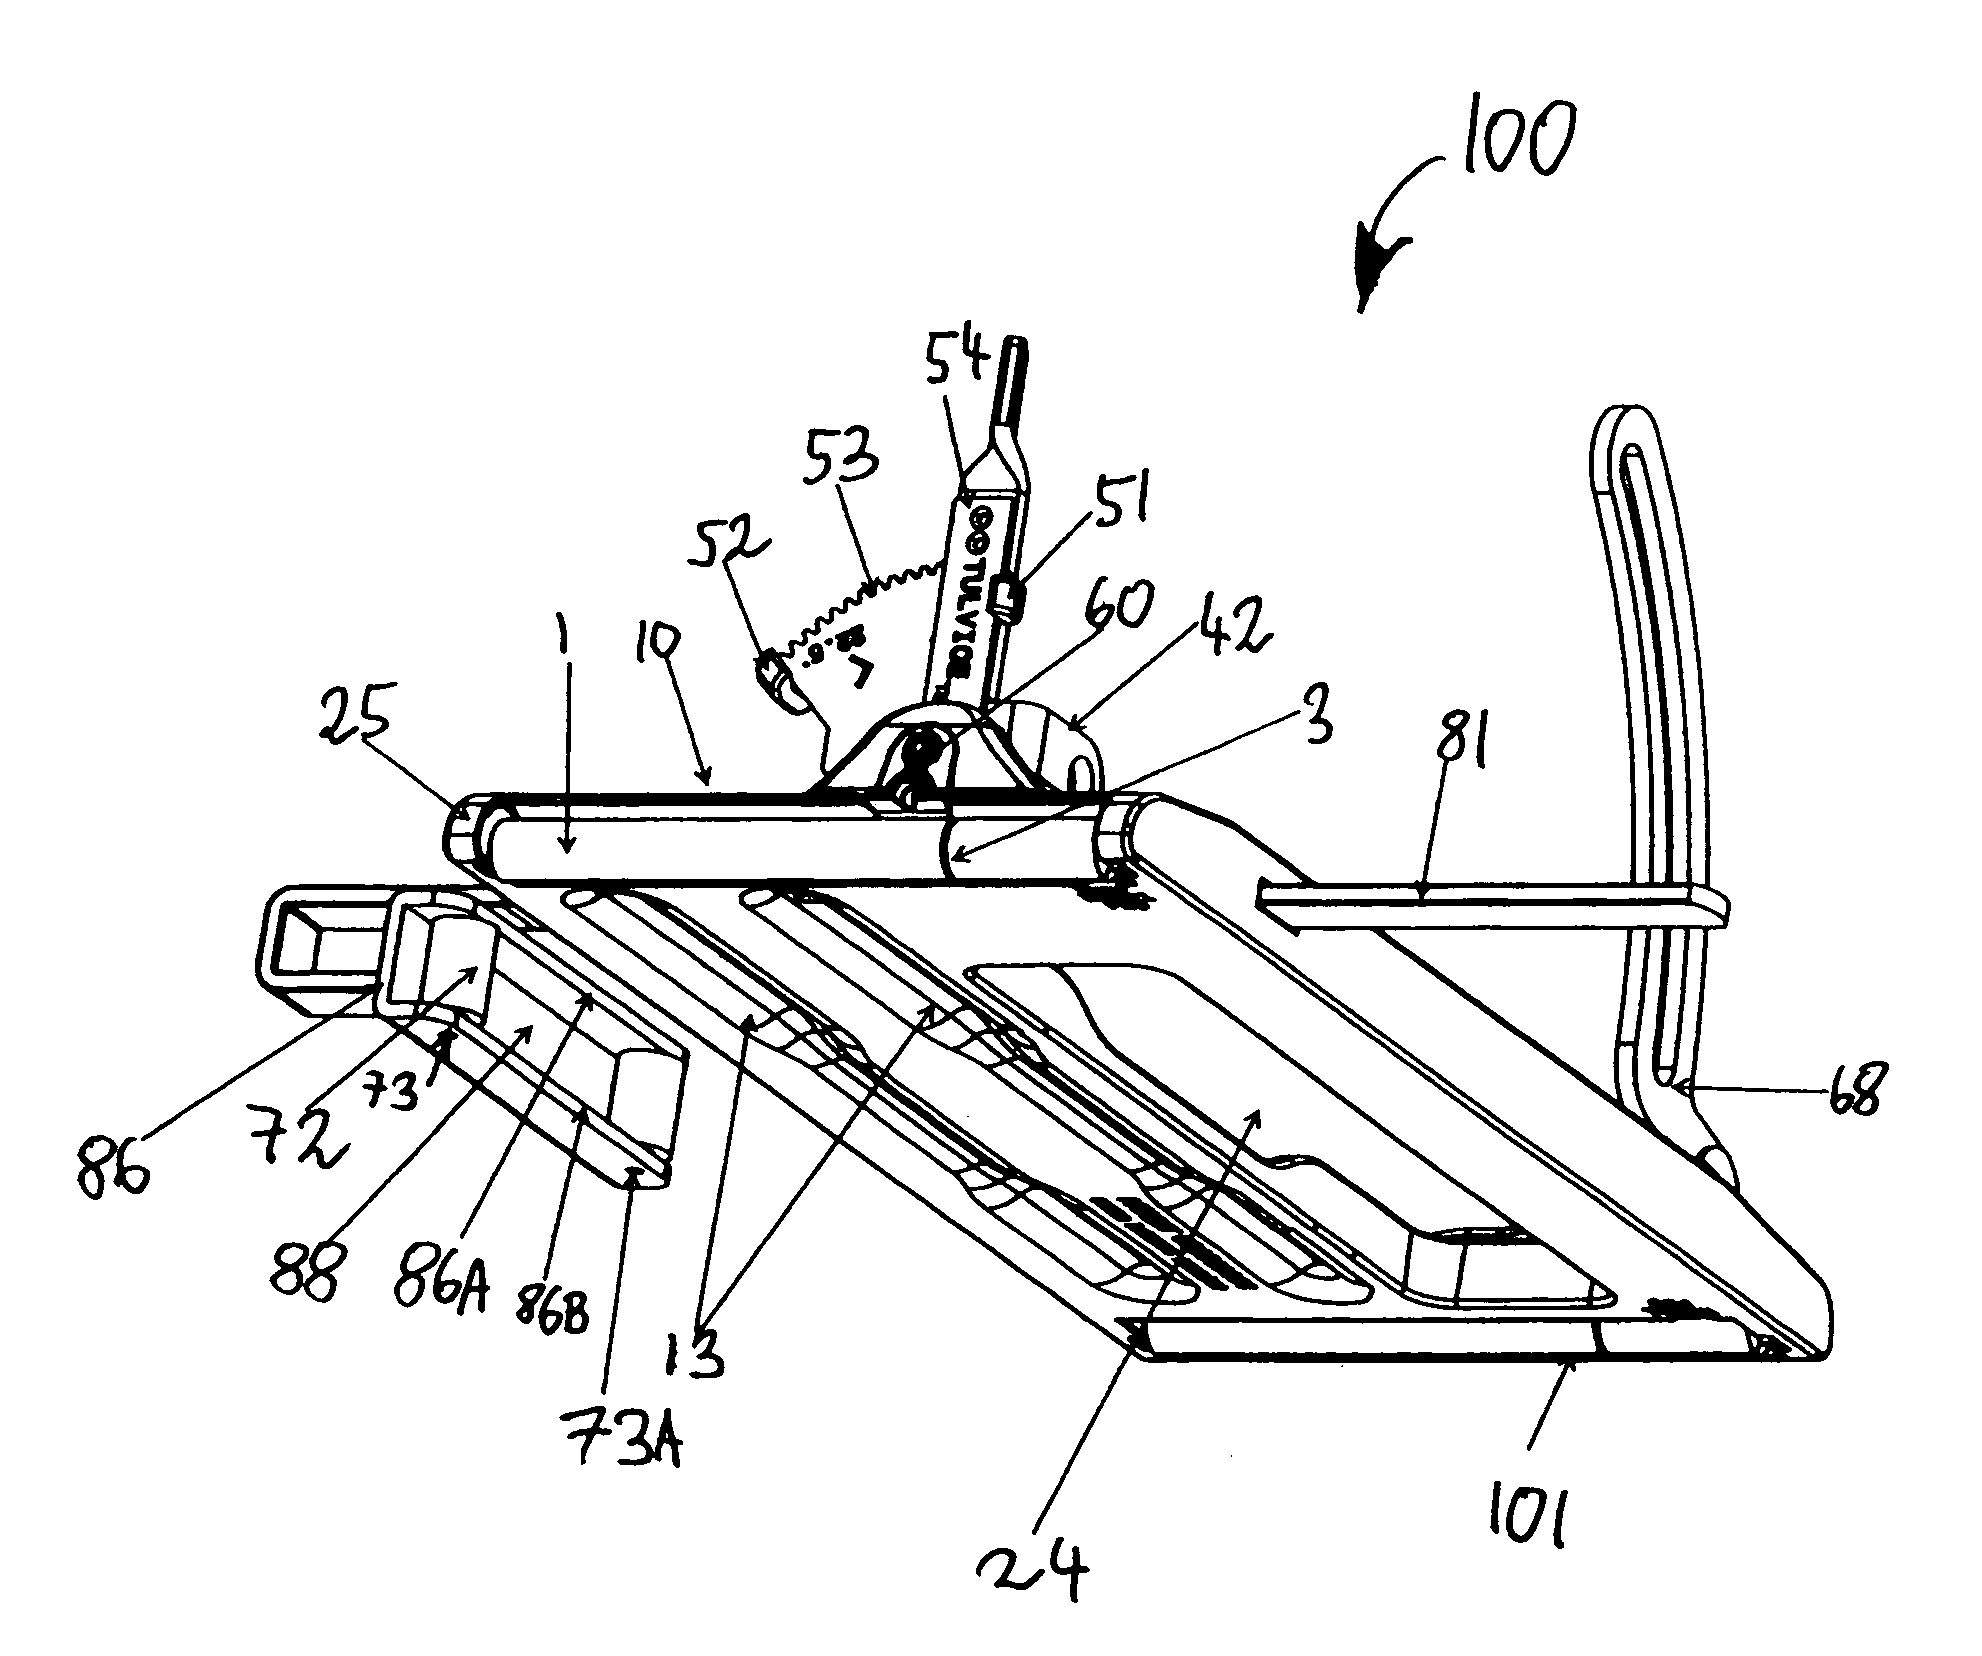 Rolling plate assembly attachment for portable power cutting tools including an improved structural design and manufactured out of improved materials, an improved wheel configuration, and an adjustable bevel gear and a cutting guide